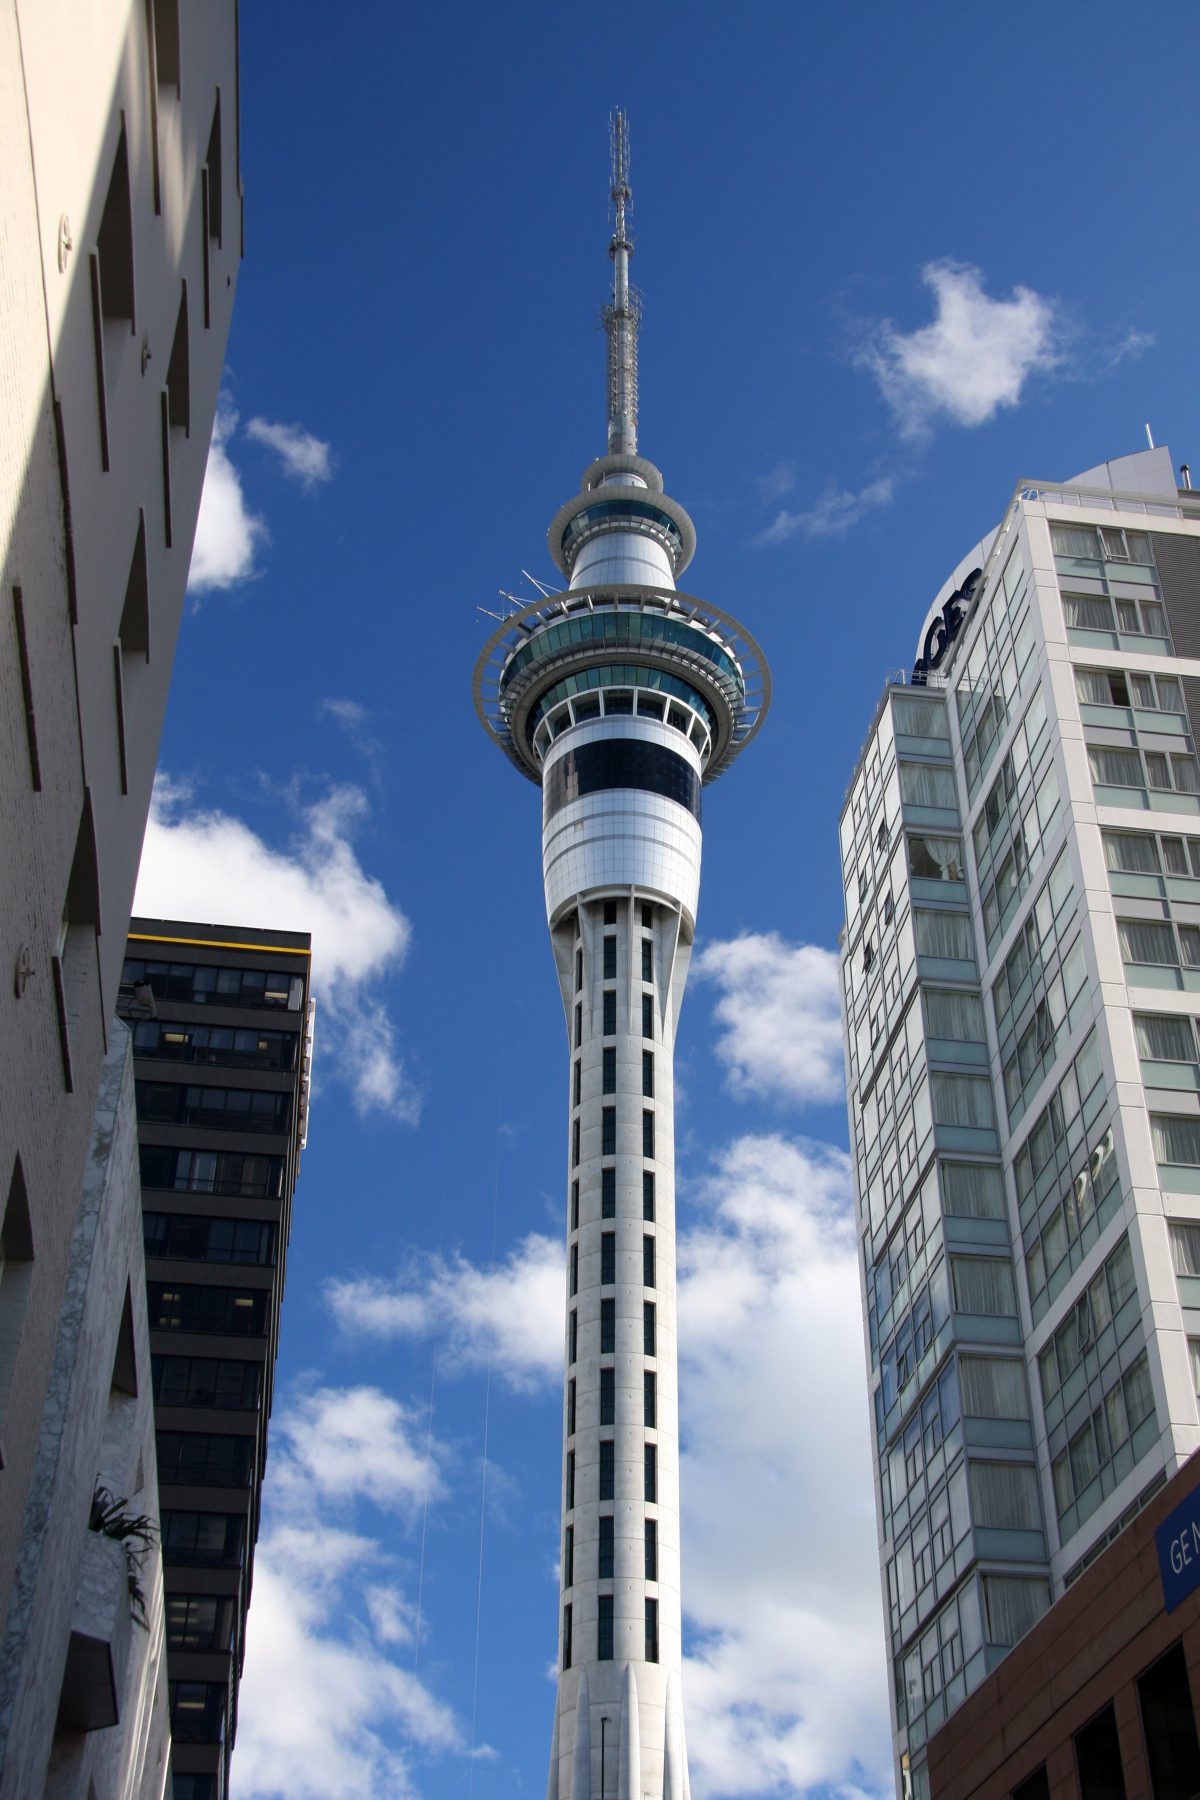 72 Hours in Auckland New Zealand with Kids